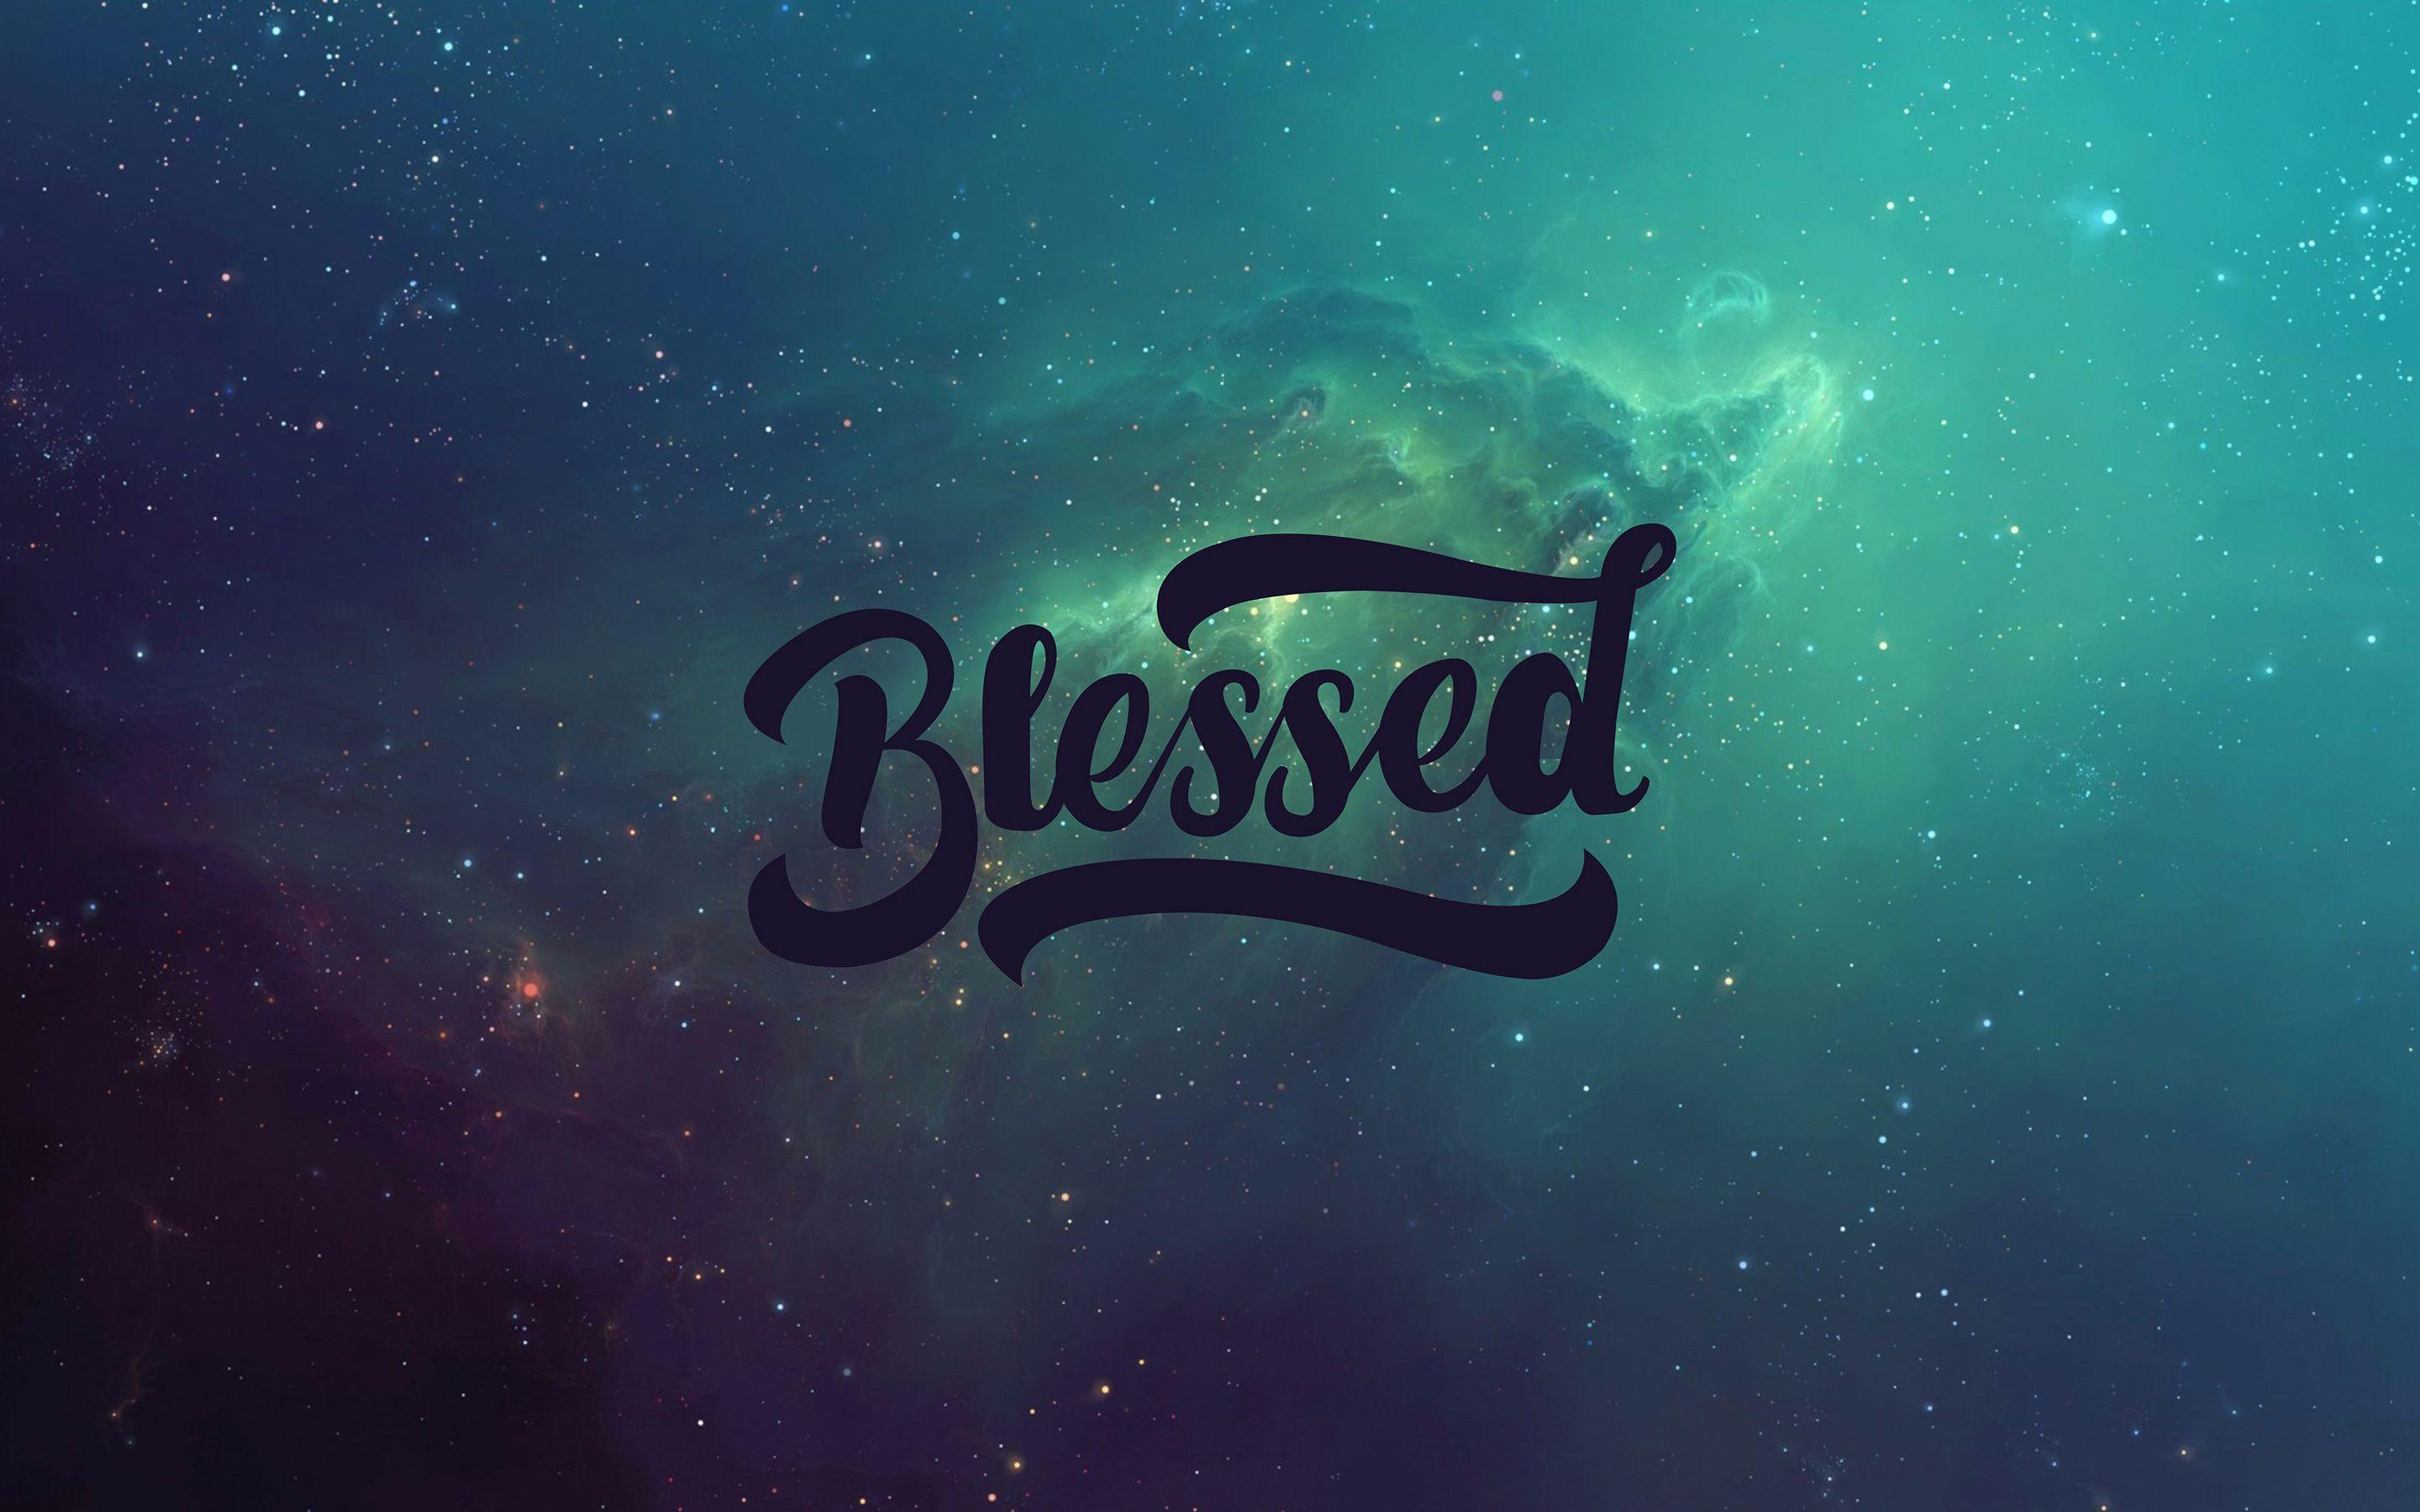 Blessed wallpaper by whitepony22  Download on ZEDGE  6b80